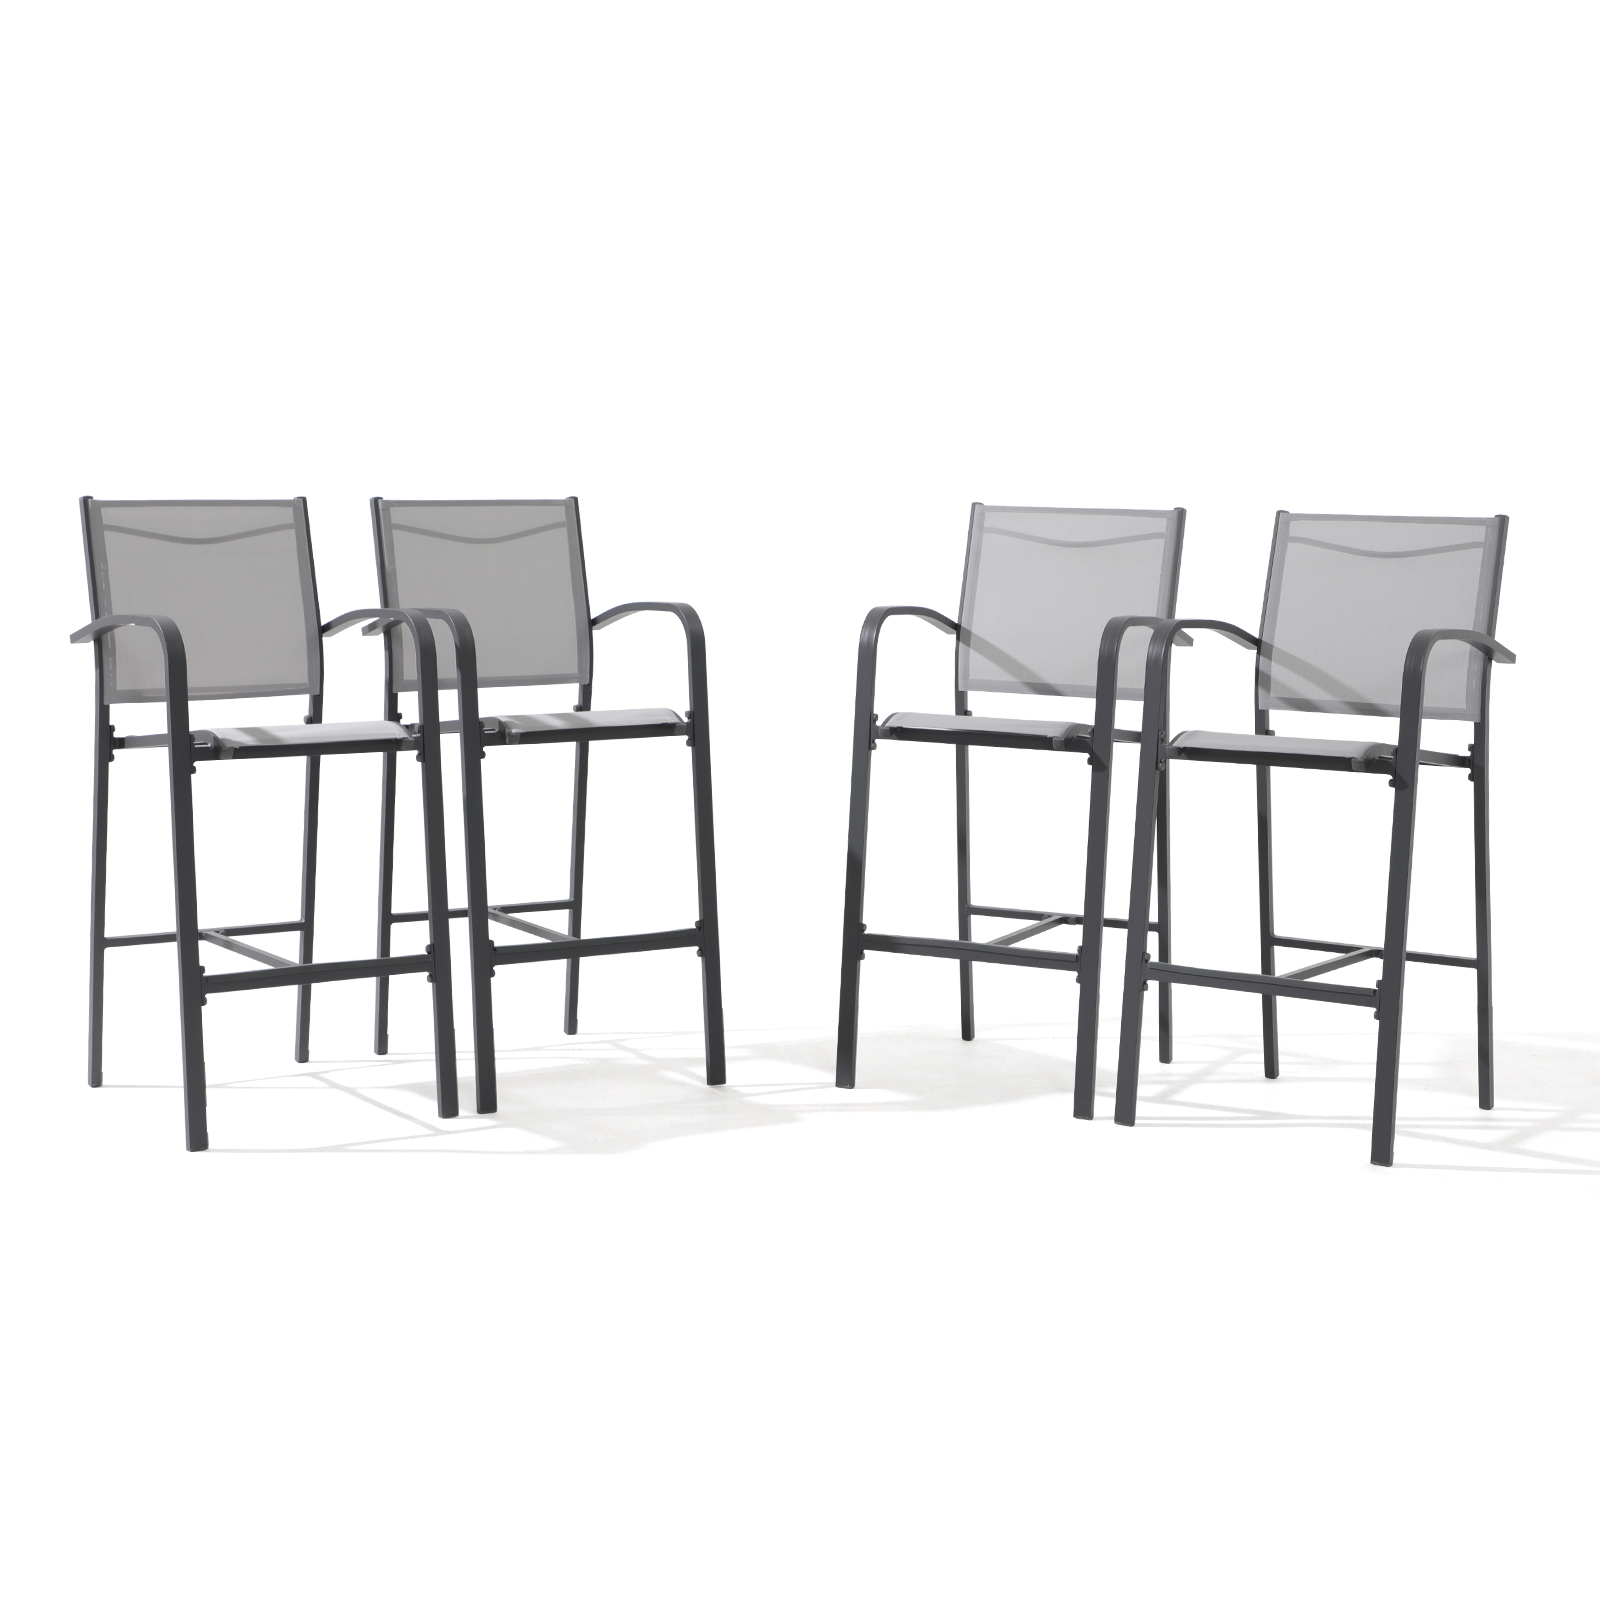 Outdoor Bar Stools Set of 2, All-Weather Aluminum Textile Fabric High Top Patio Chair